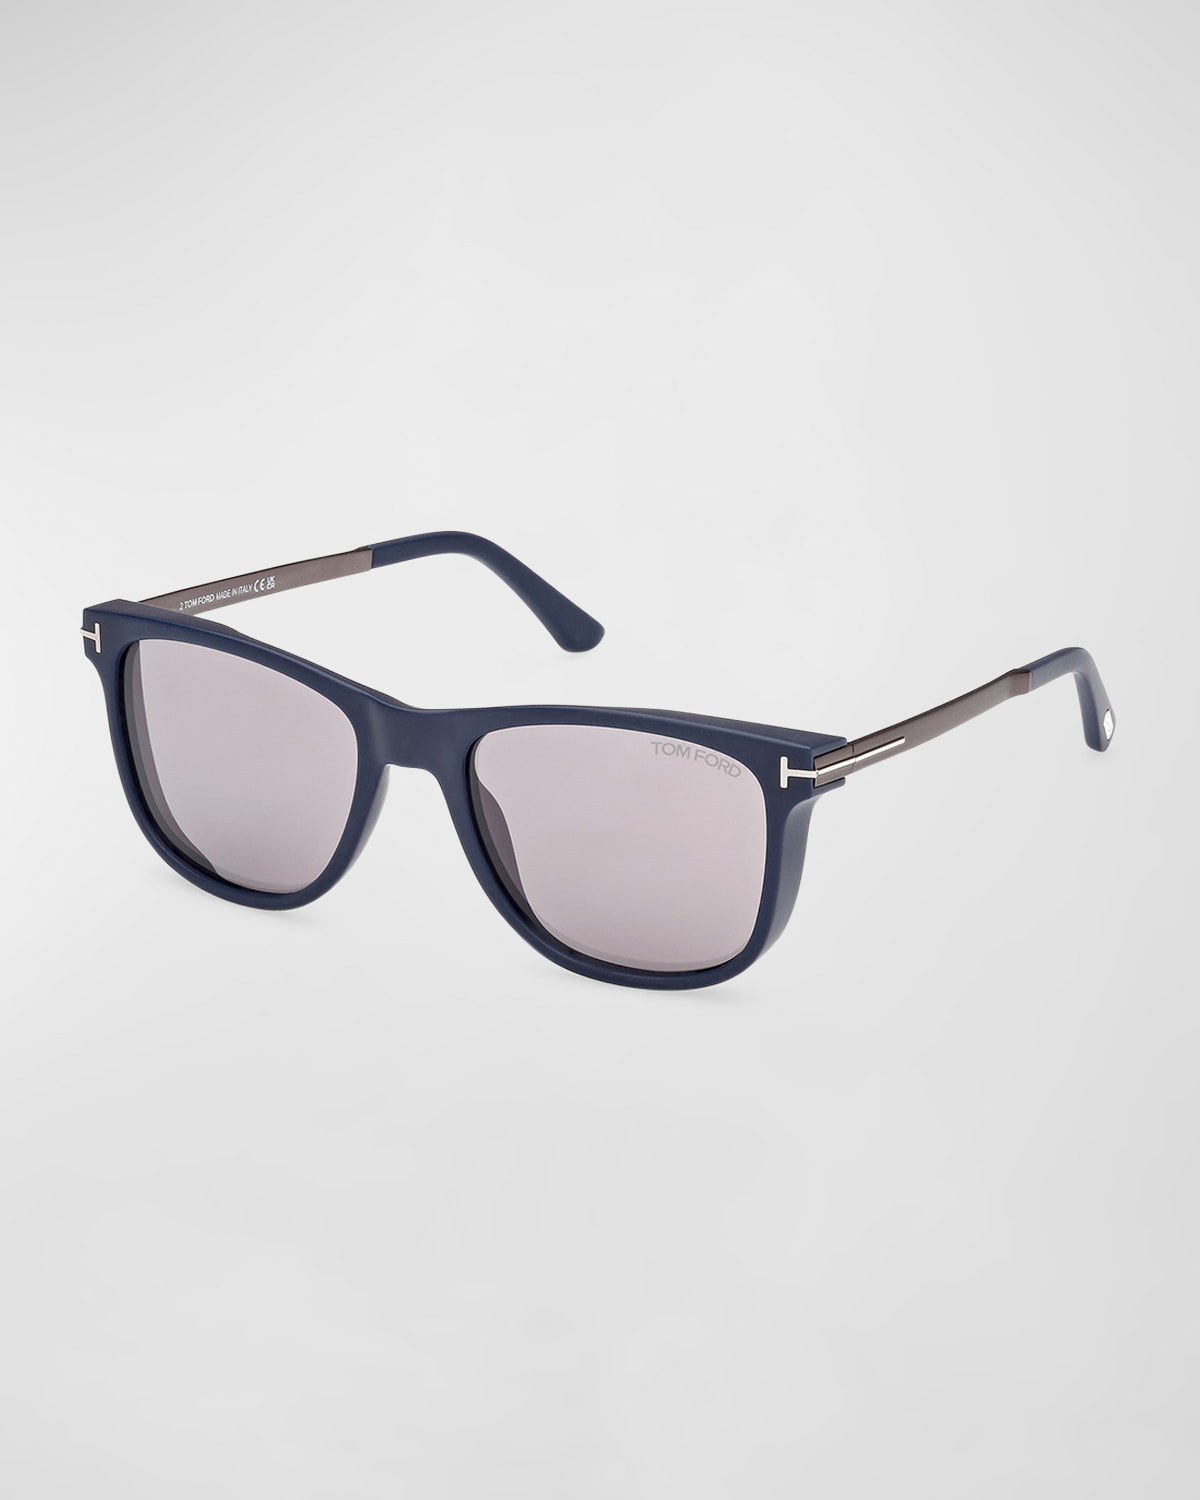 Shop Tom Ford Mirrored Acetate Square Sunglasses In Matte Navy Blue Silver Smoke Mirror Lenses